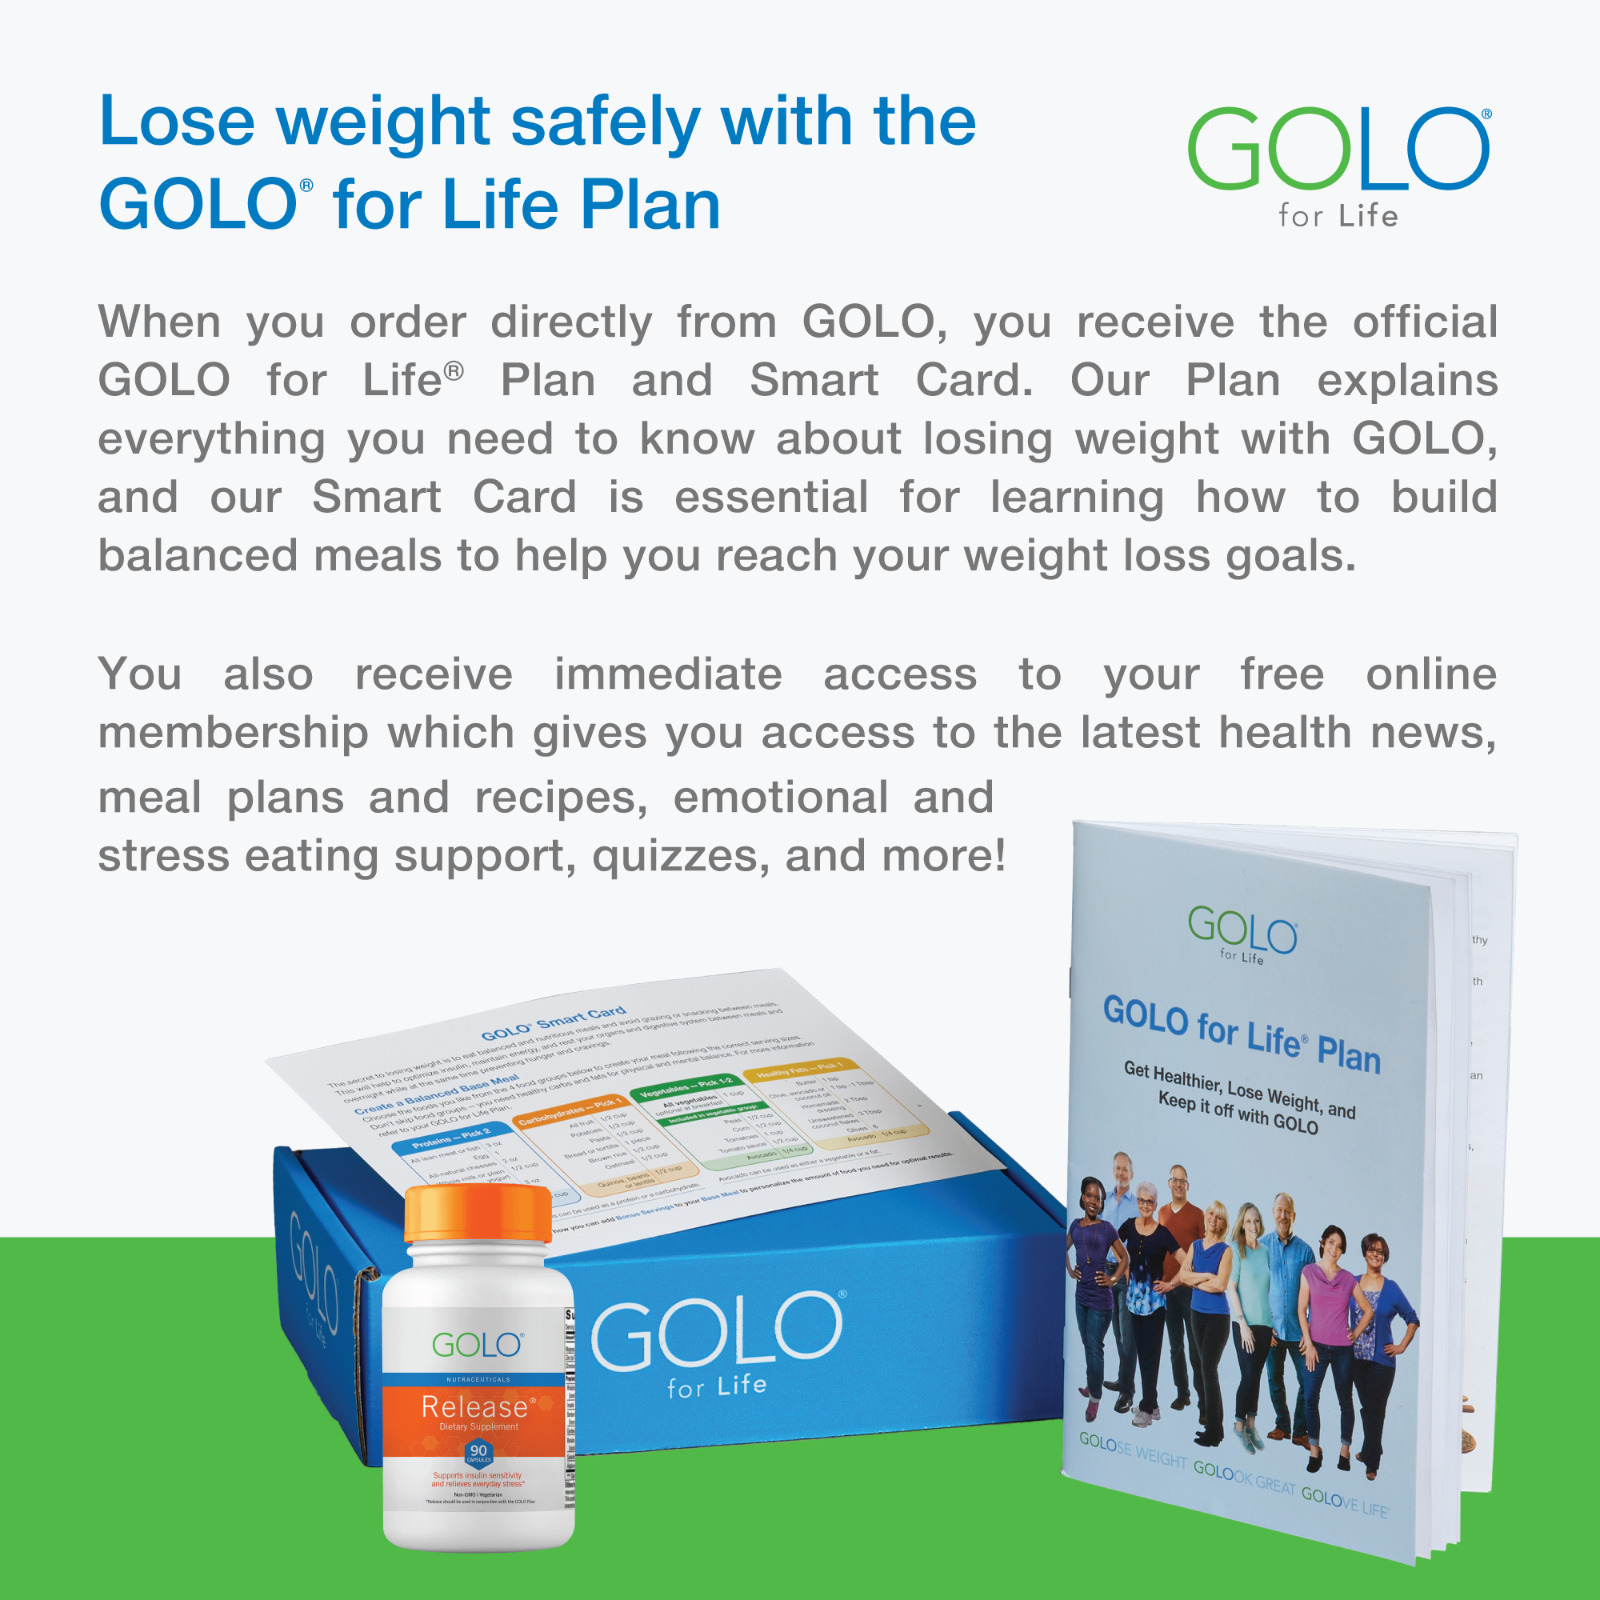 GOLO Life Plan with Release Supplement Kit - $59.95